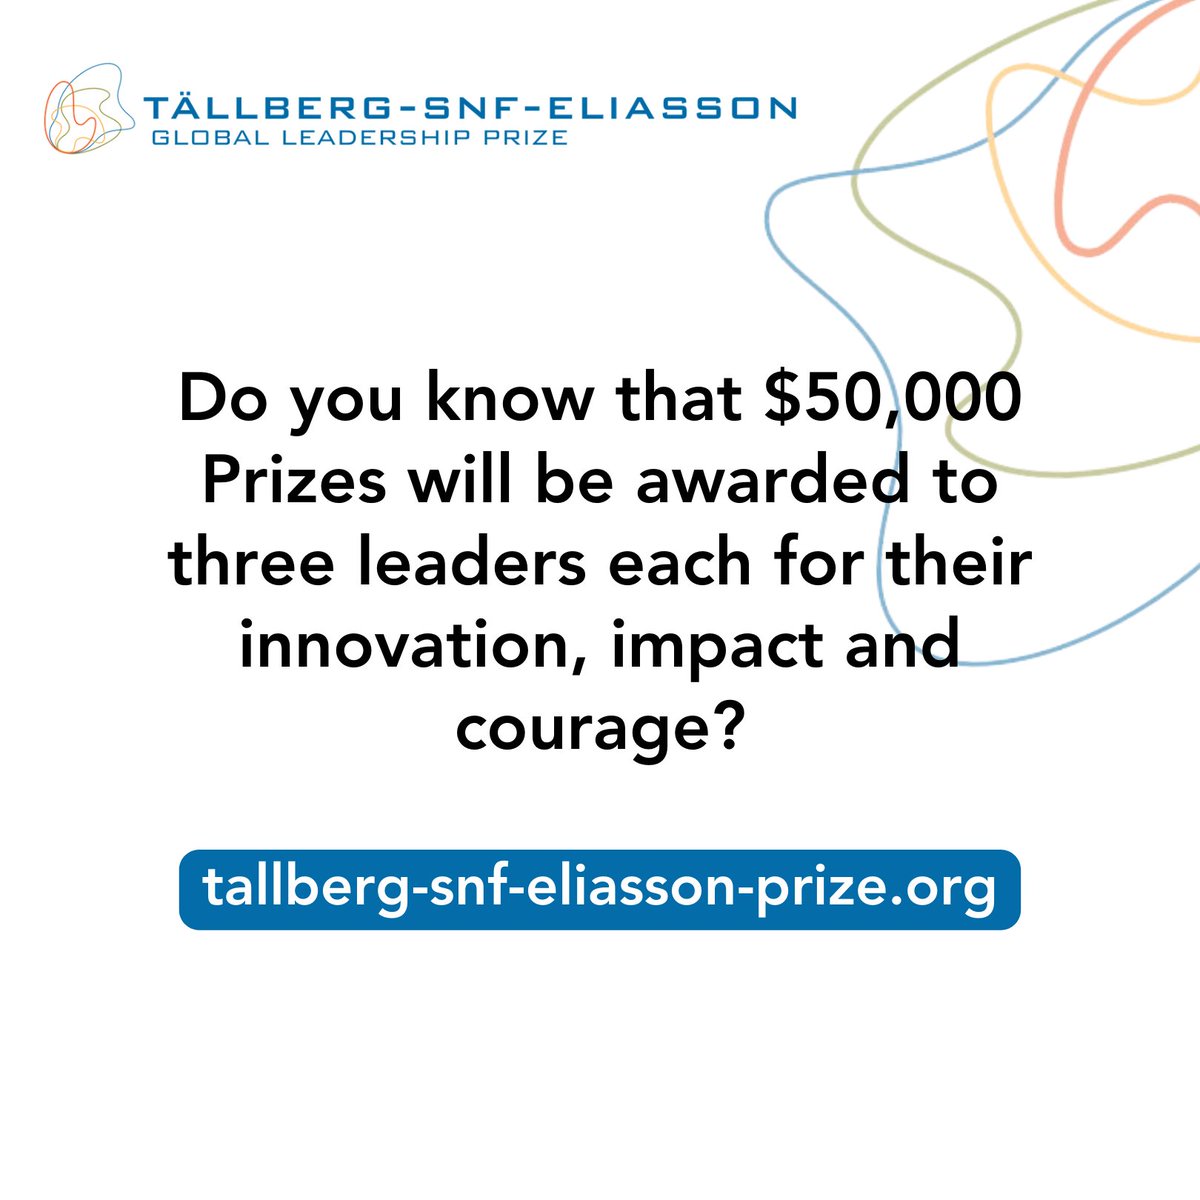 In 2024, through the generous support of the Stavros Niarchos Foundation (SNF), we will award three prizes. Each winner will be celebrated by their peers, receive an unrestricted grant of $50,000, and be invited to join the Tällberg network of global leaders.